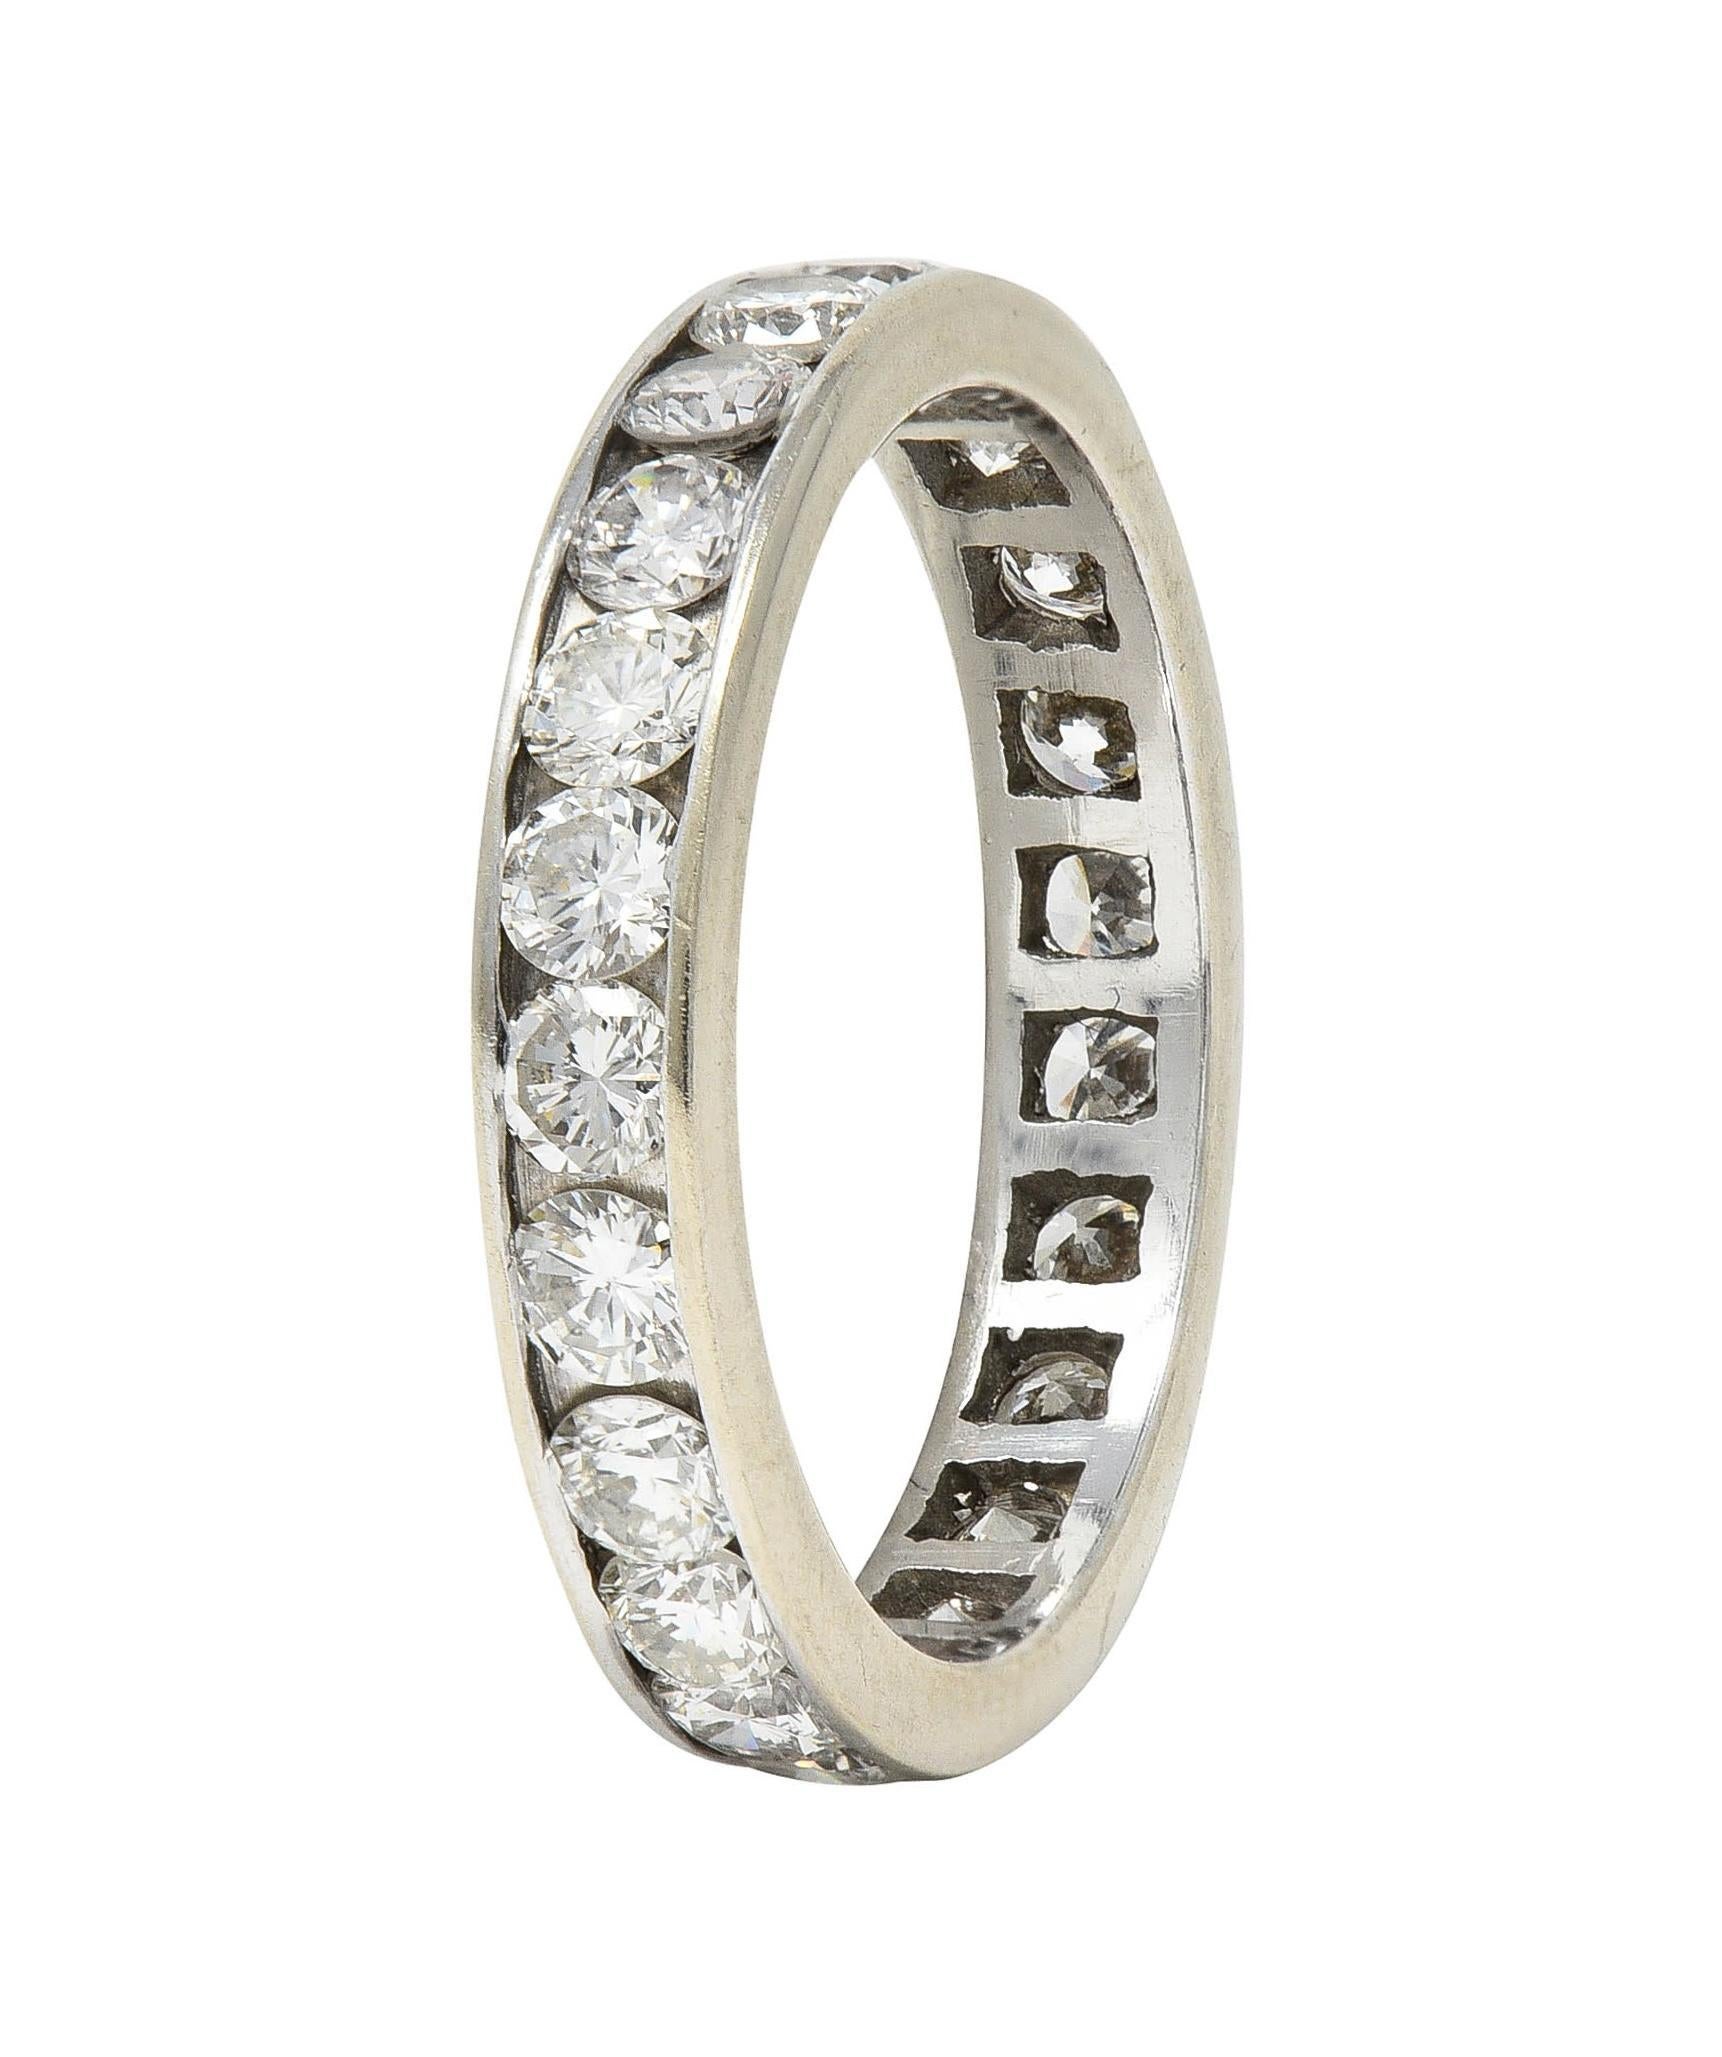 Featuring round brilliant cut diamond channel set fully around 
Weighing approximately 1.61 carats total 
G/H color and VS to SI clarity
With high polish finish
Tested as 14 karat white gold
Circa: 2000s
Ring Size: 6 3/4 and not sizable 
Measures